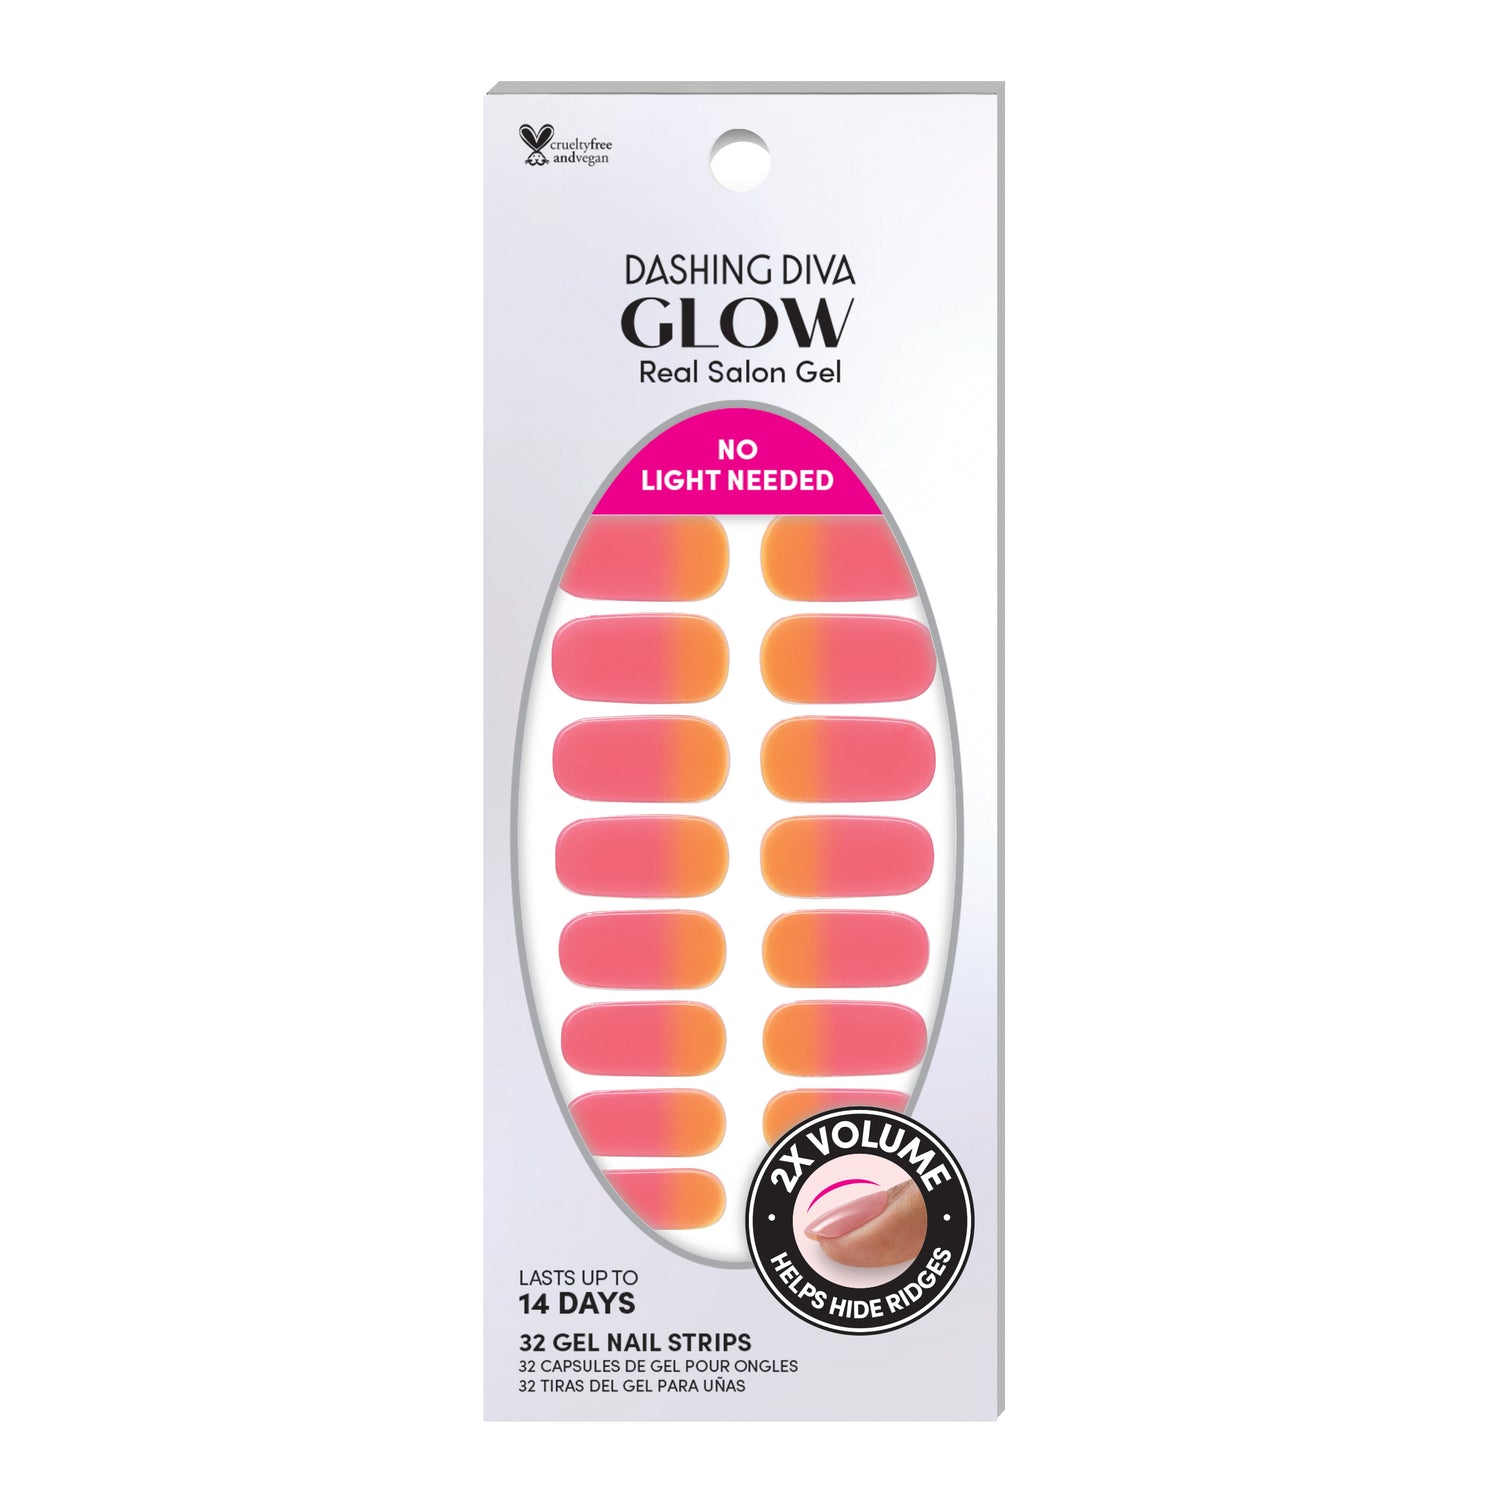 Pink & orange ombré gel nail strips with a double gel formula for an ultra-smooth finish.